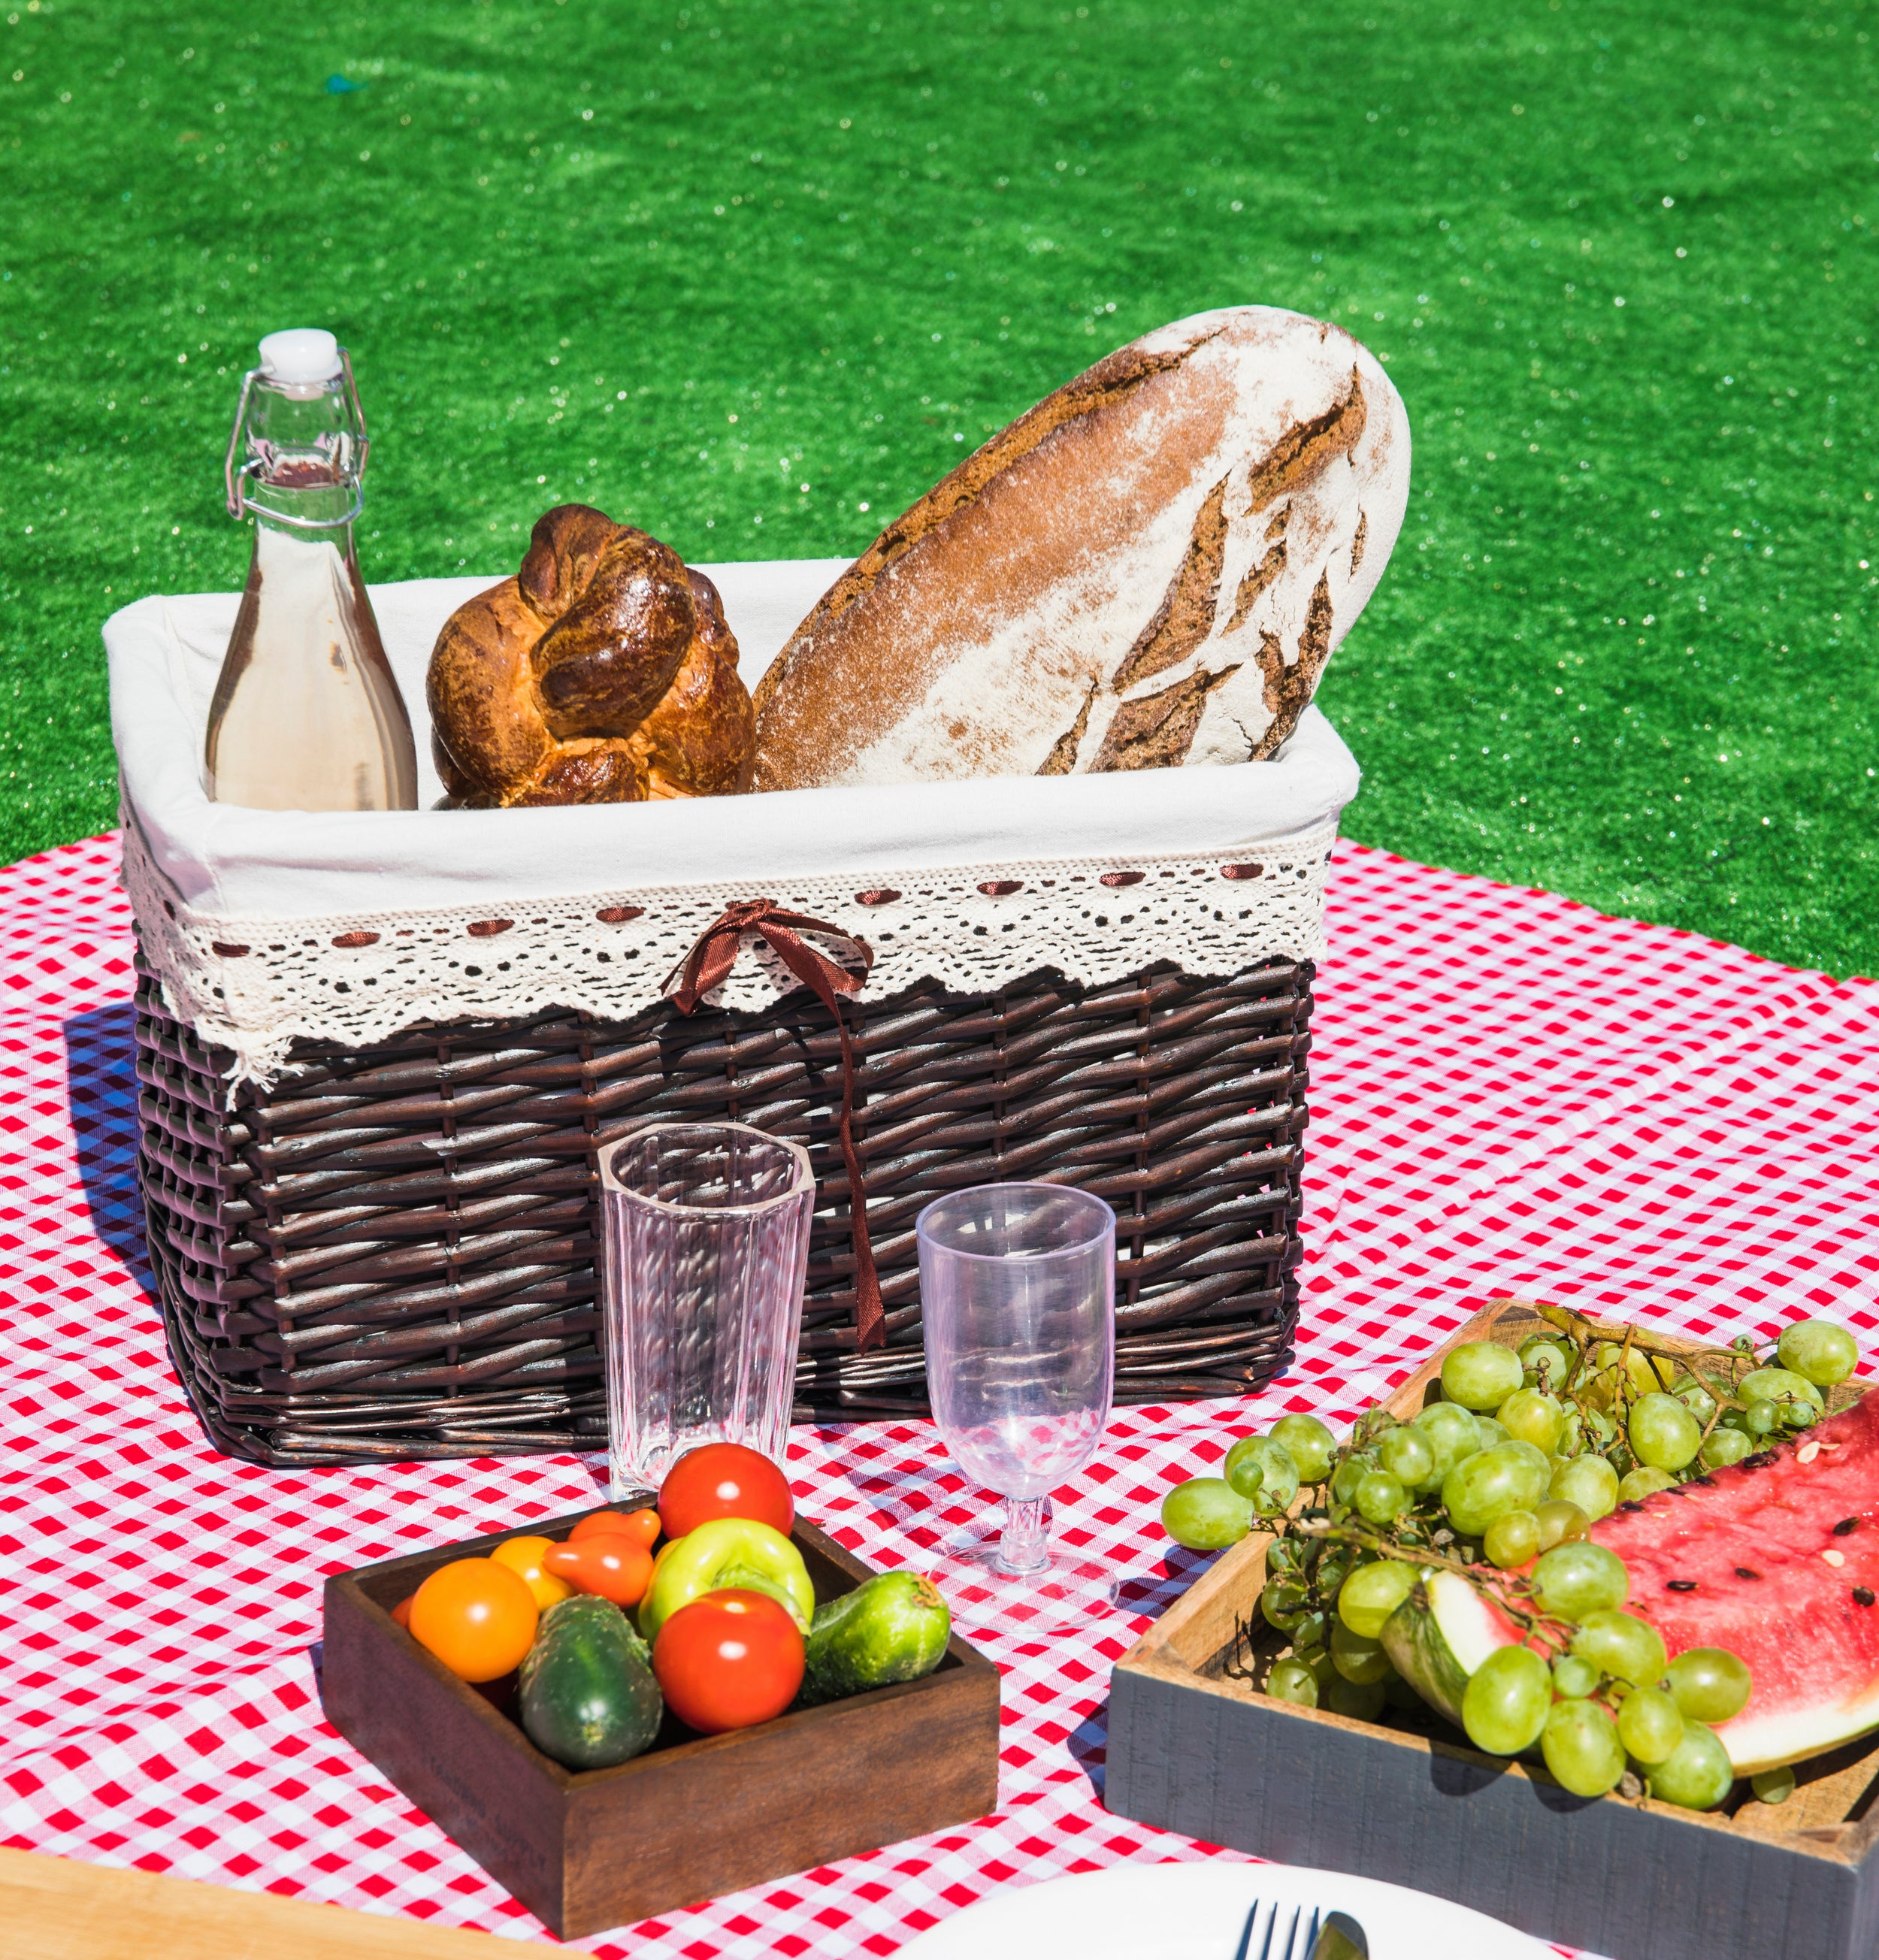 What to include in your picnic basket?